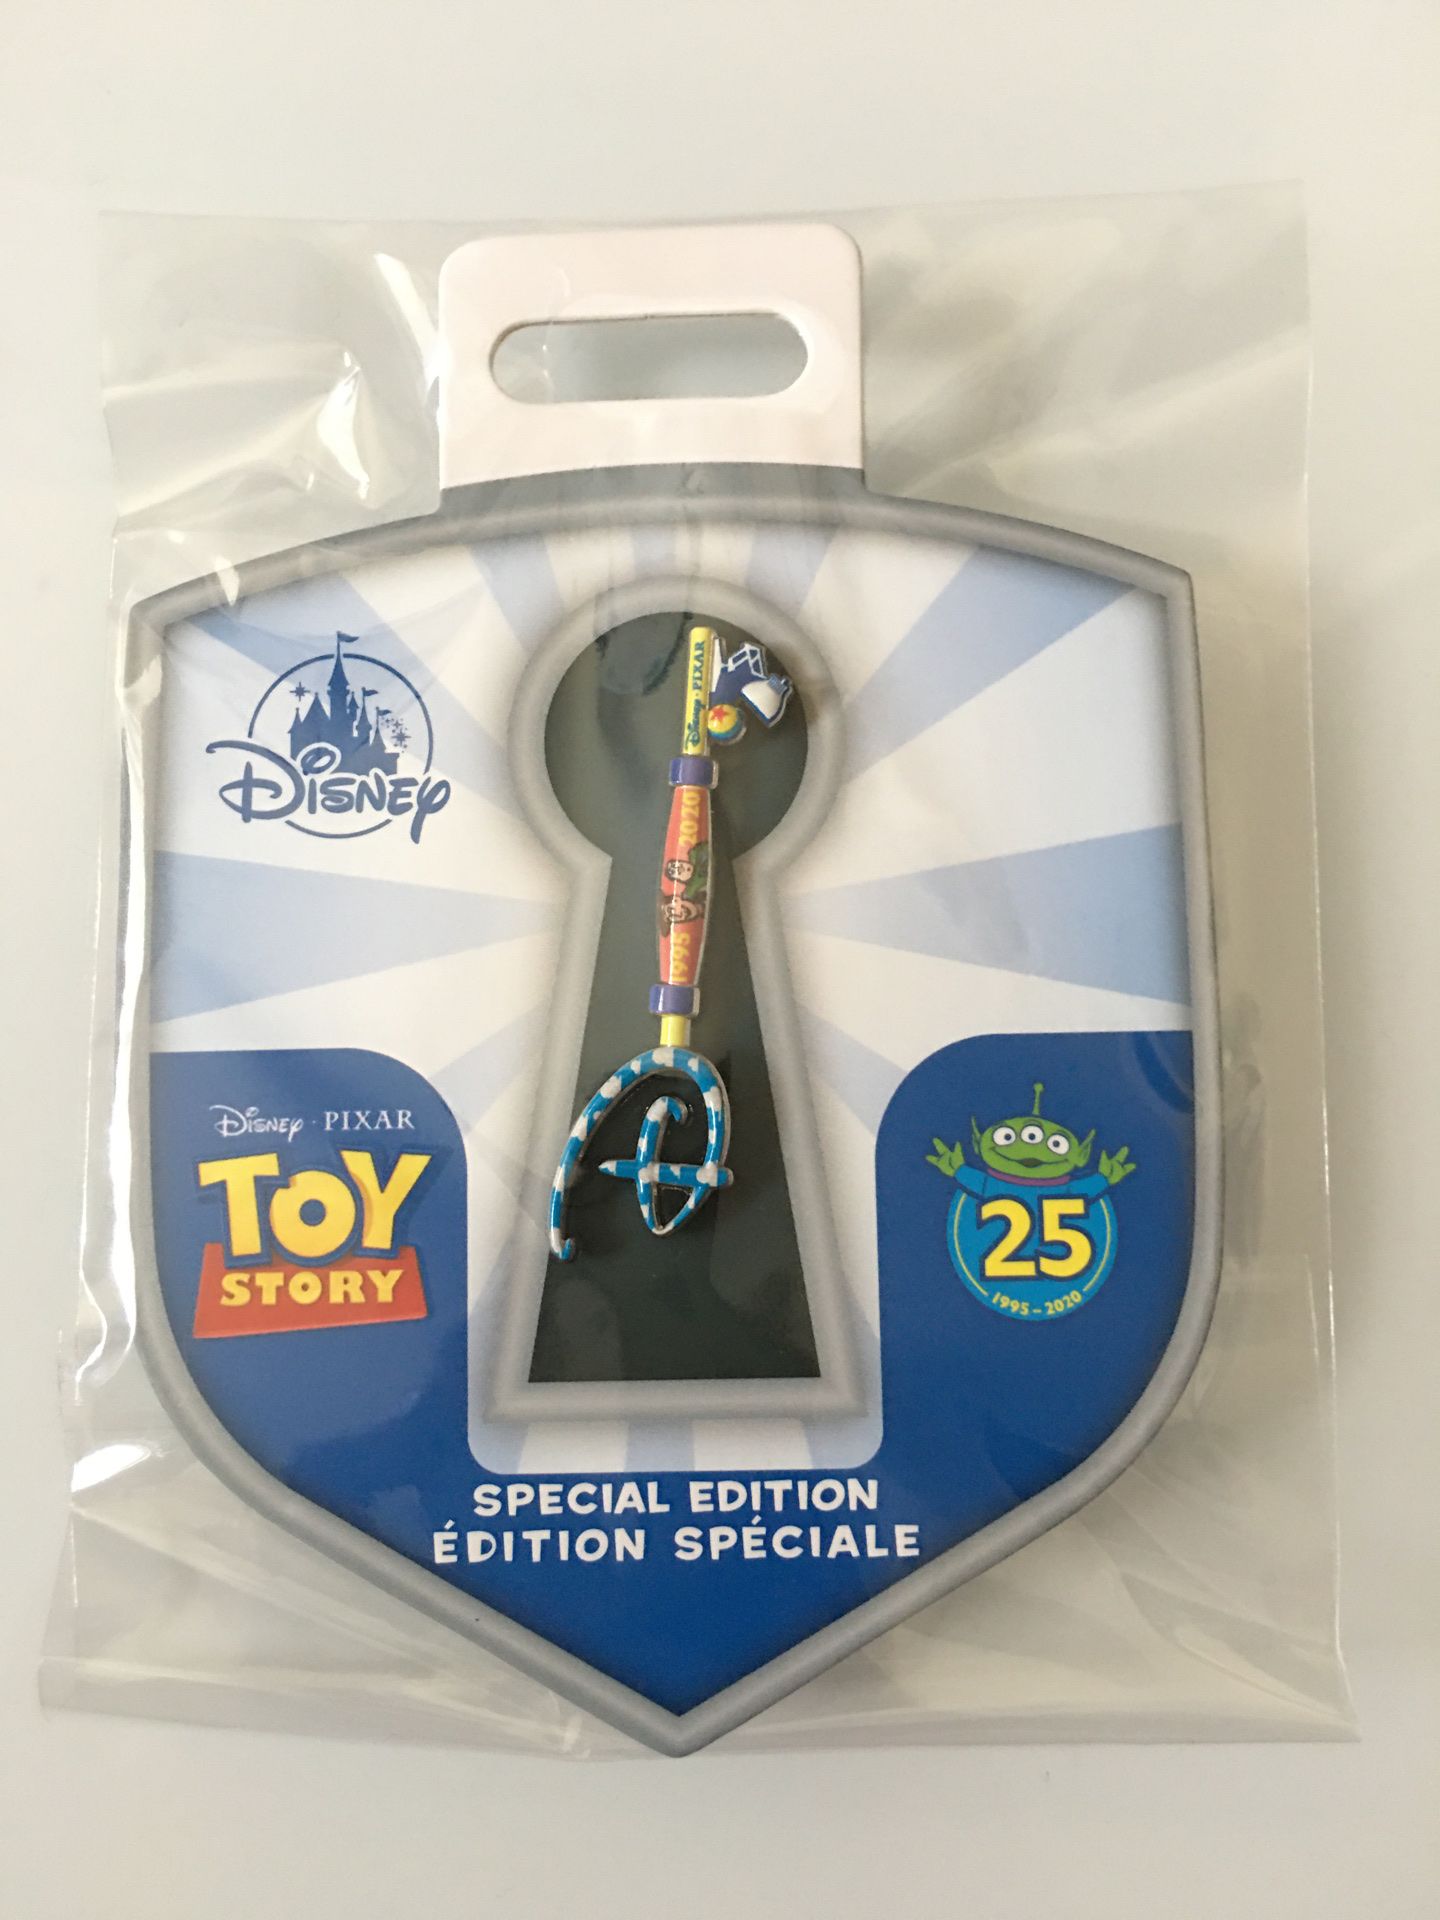 Toy Story 25th Anniversary Collectible Key Pin – Special